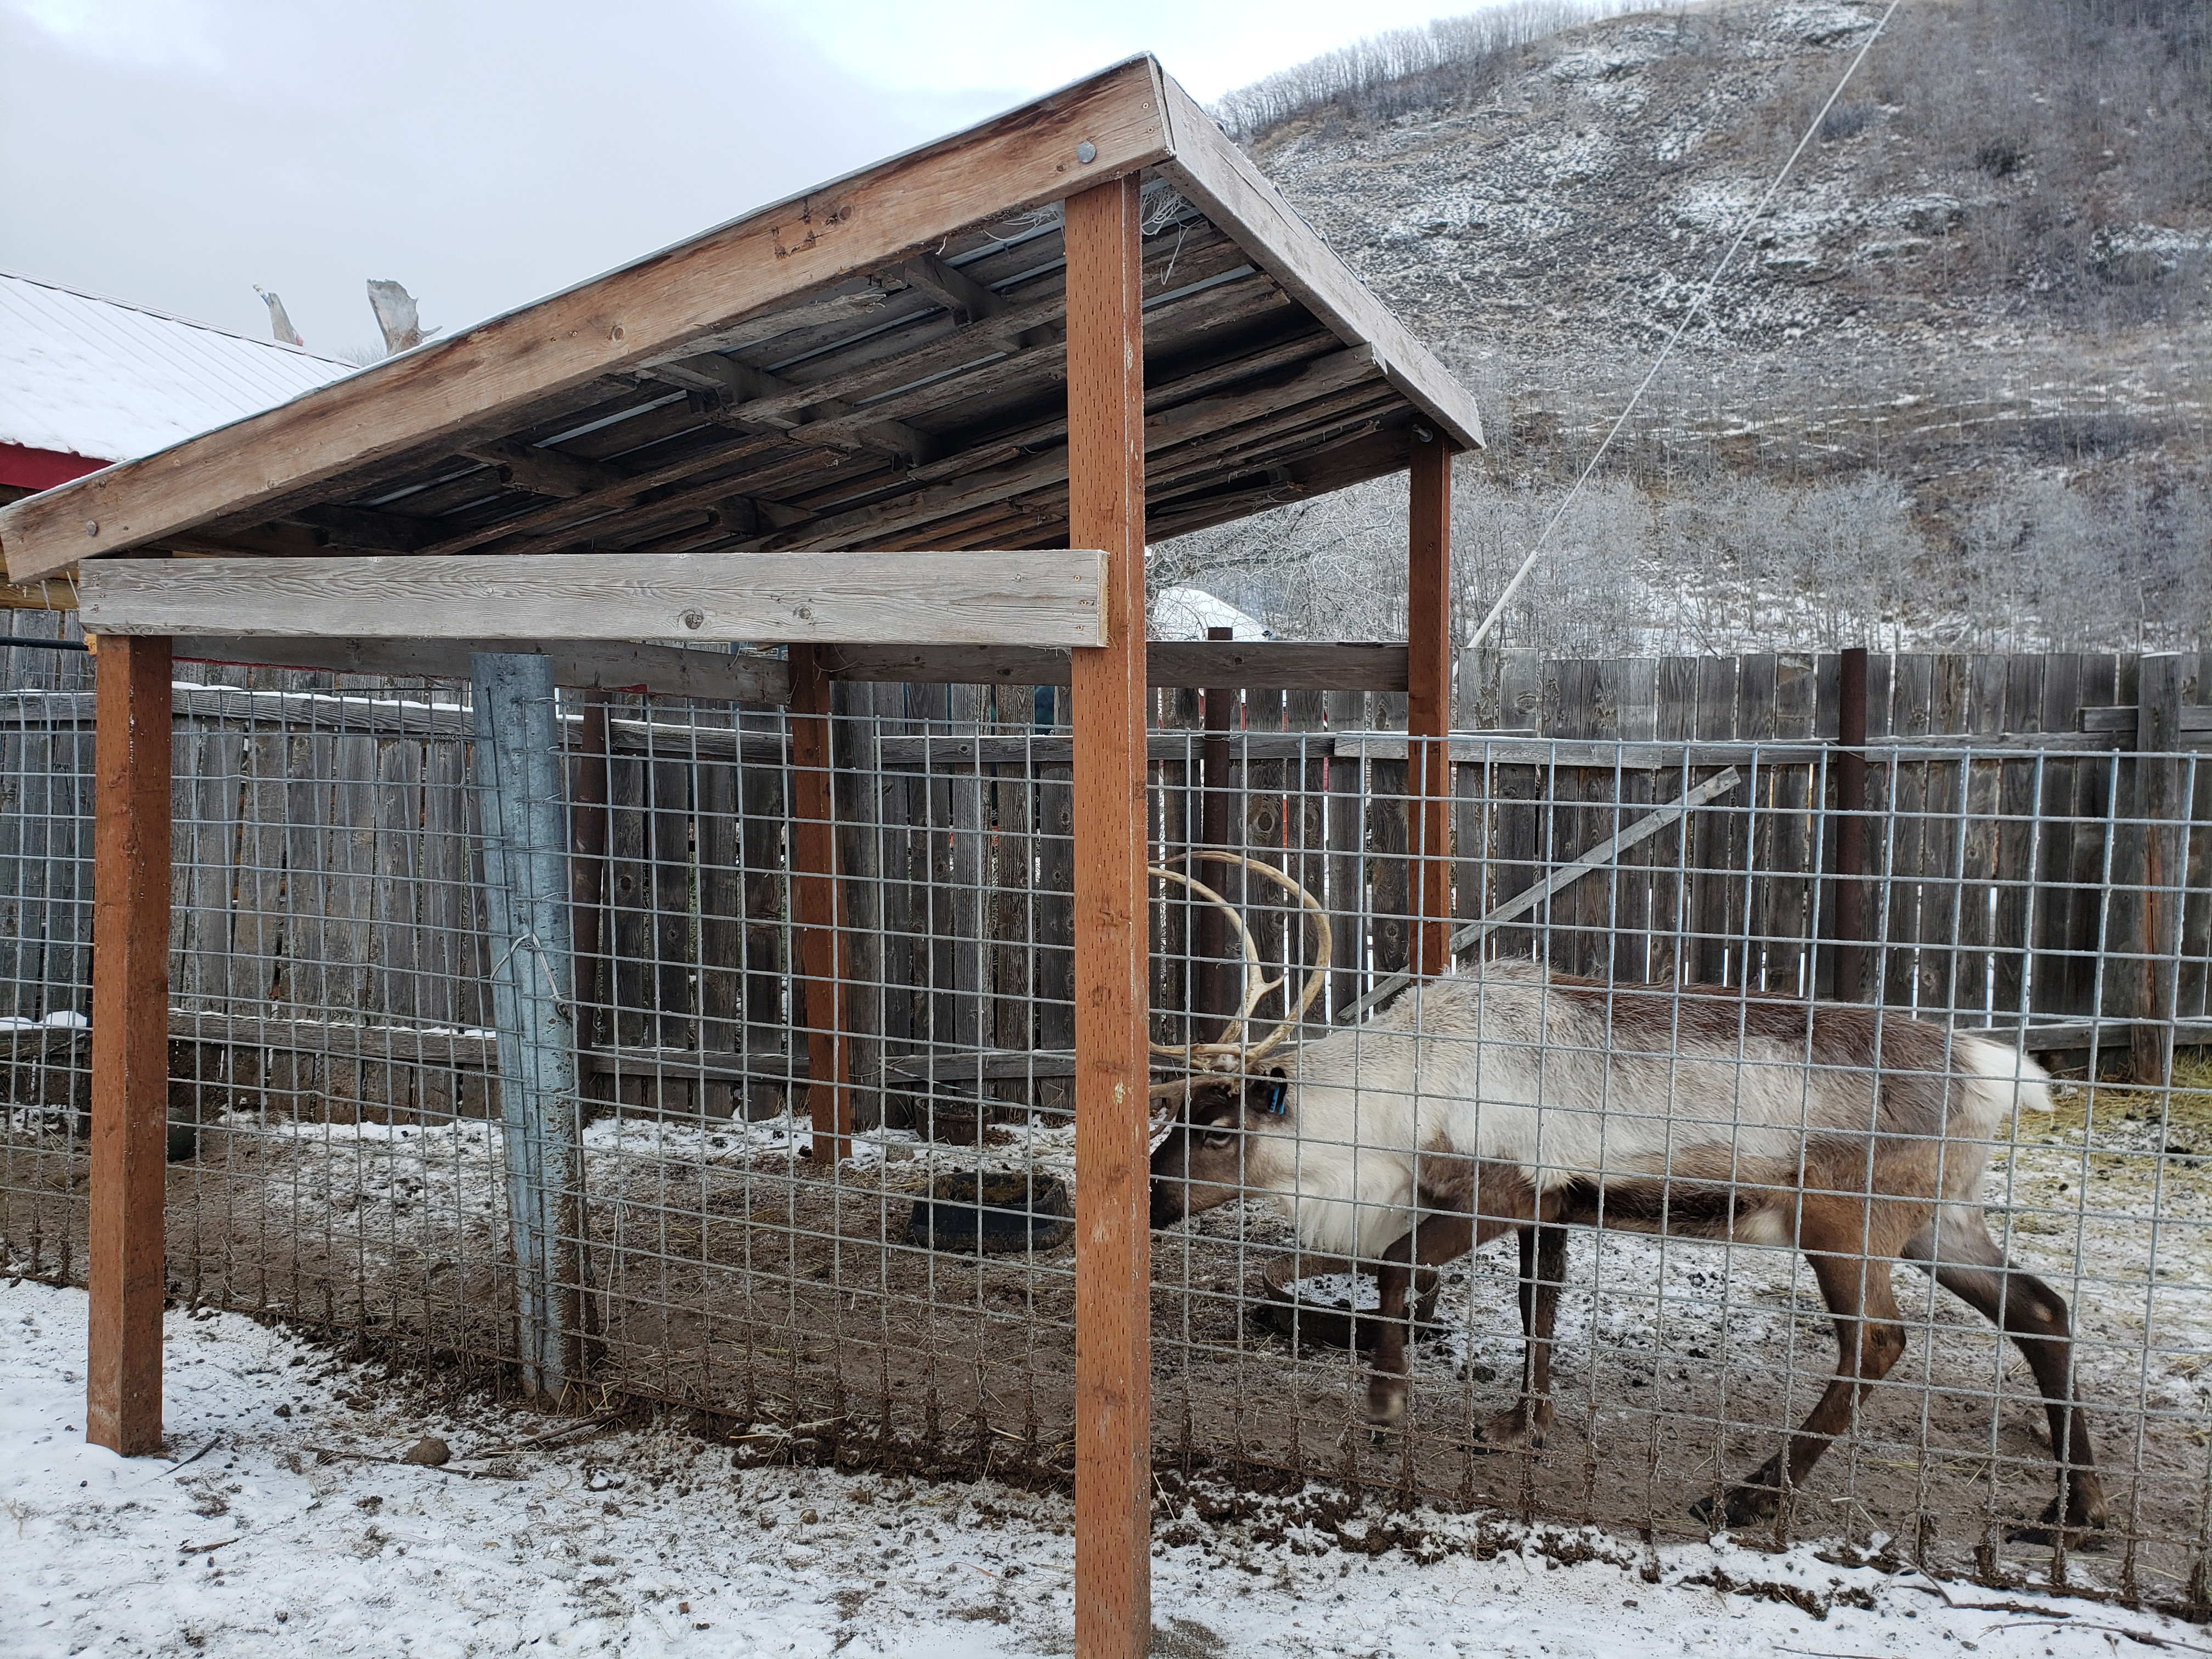 A reindeer in a pen, who may have been used for Christmas events